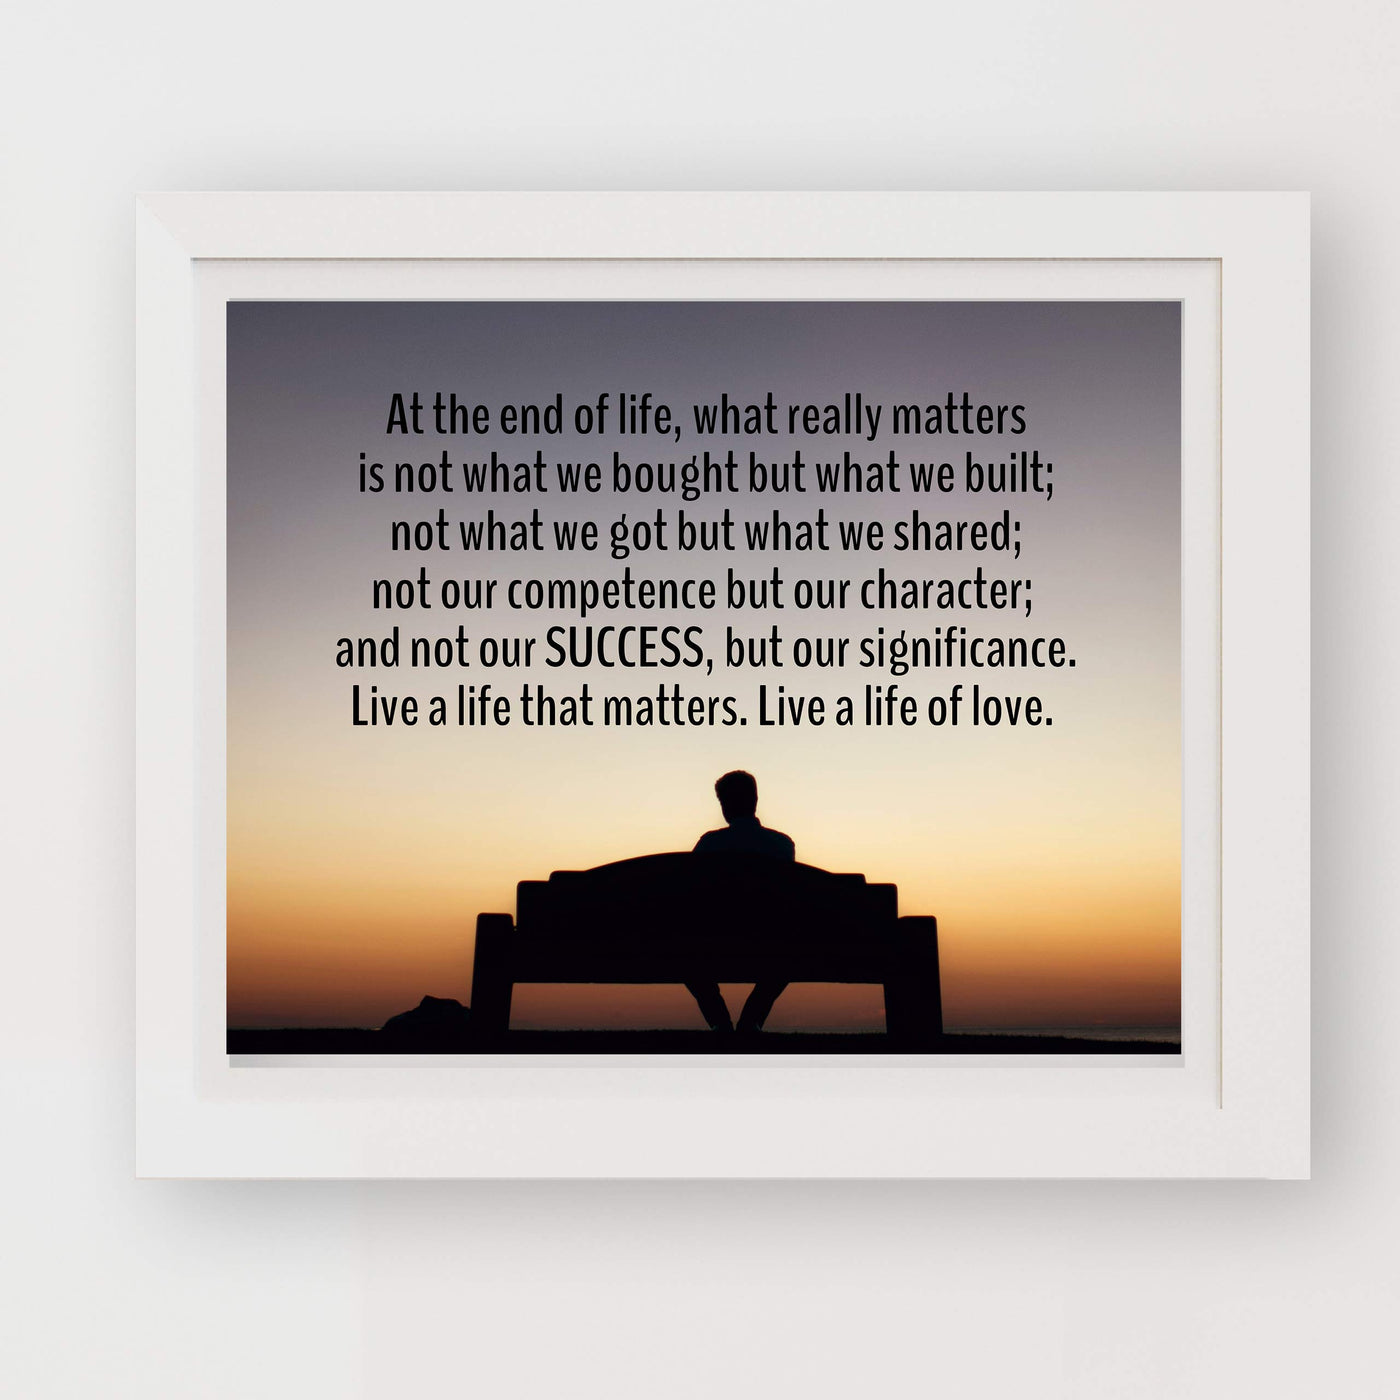 Live a Life That Matters-A Life of Love-Inspirational Quotes Wall Art -10 x 8" Motivational Sunset Poster Print-Ready to Frame. Positive Home-Office-Studio-Dorm Decor. Great Advice for All!